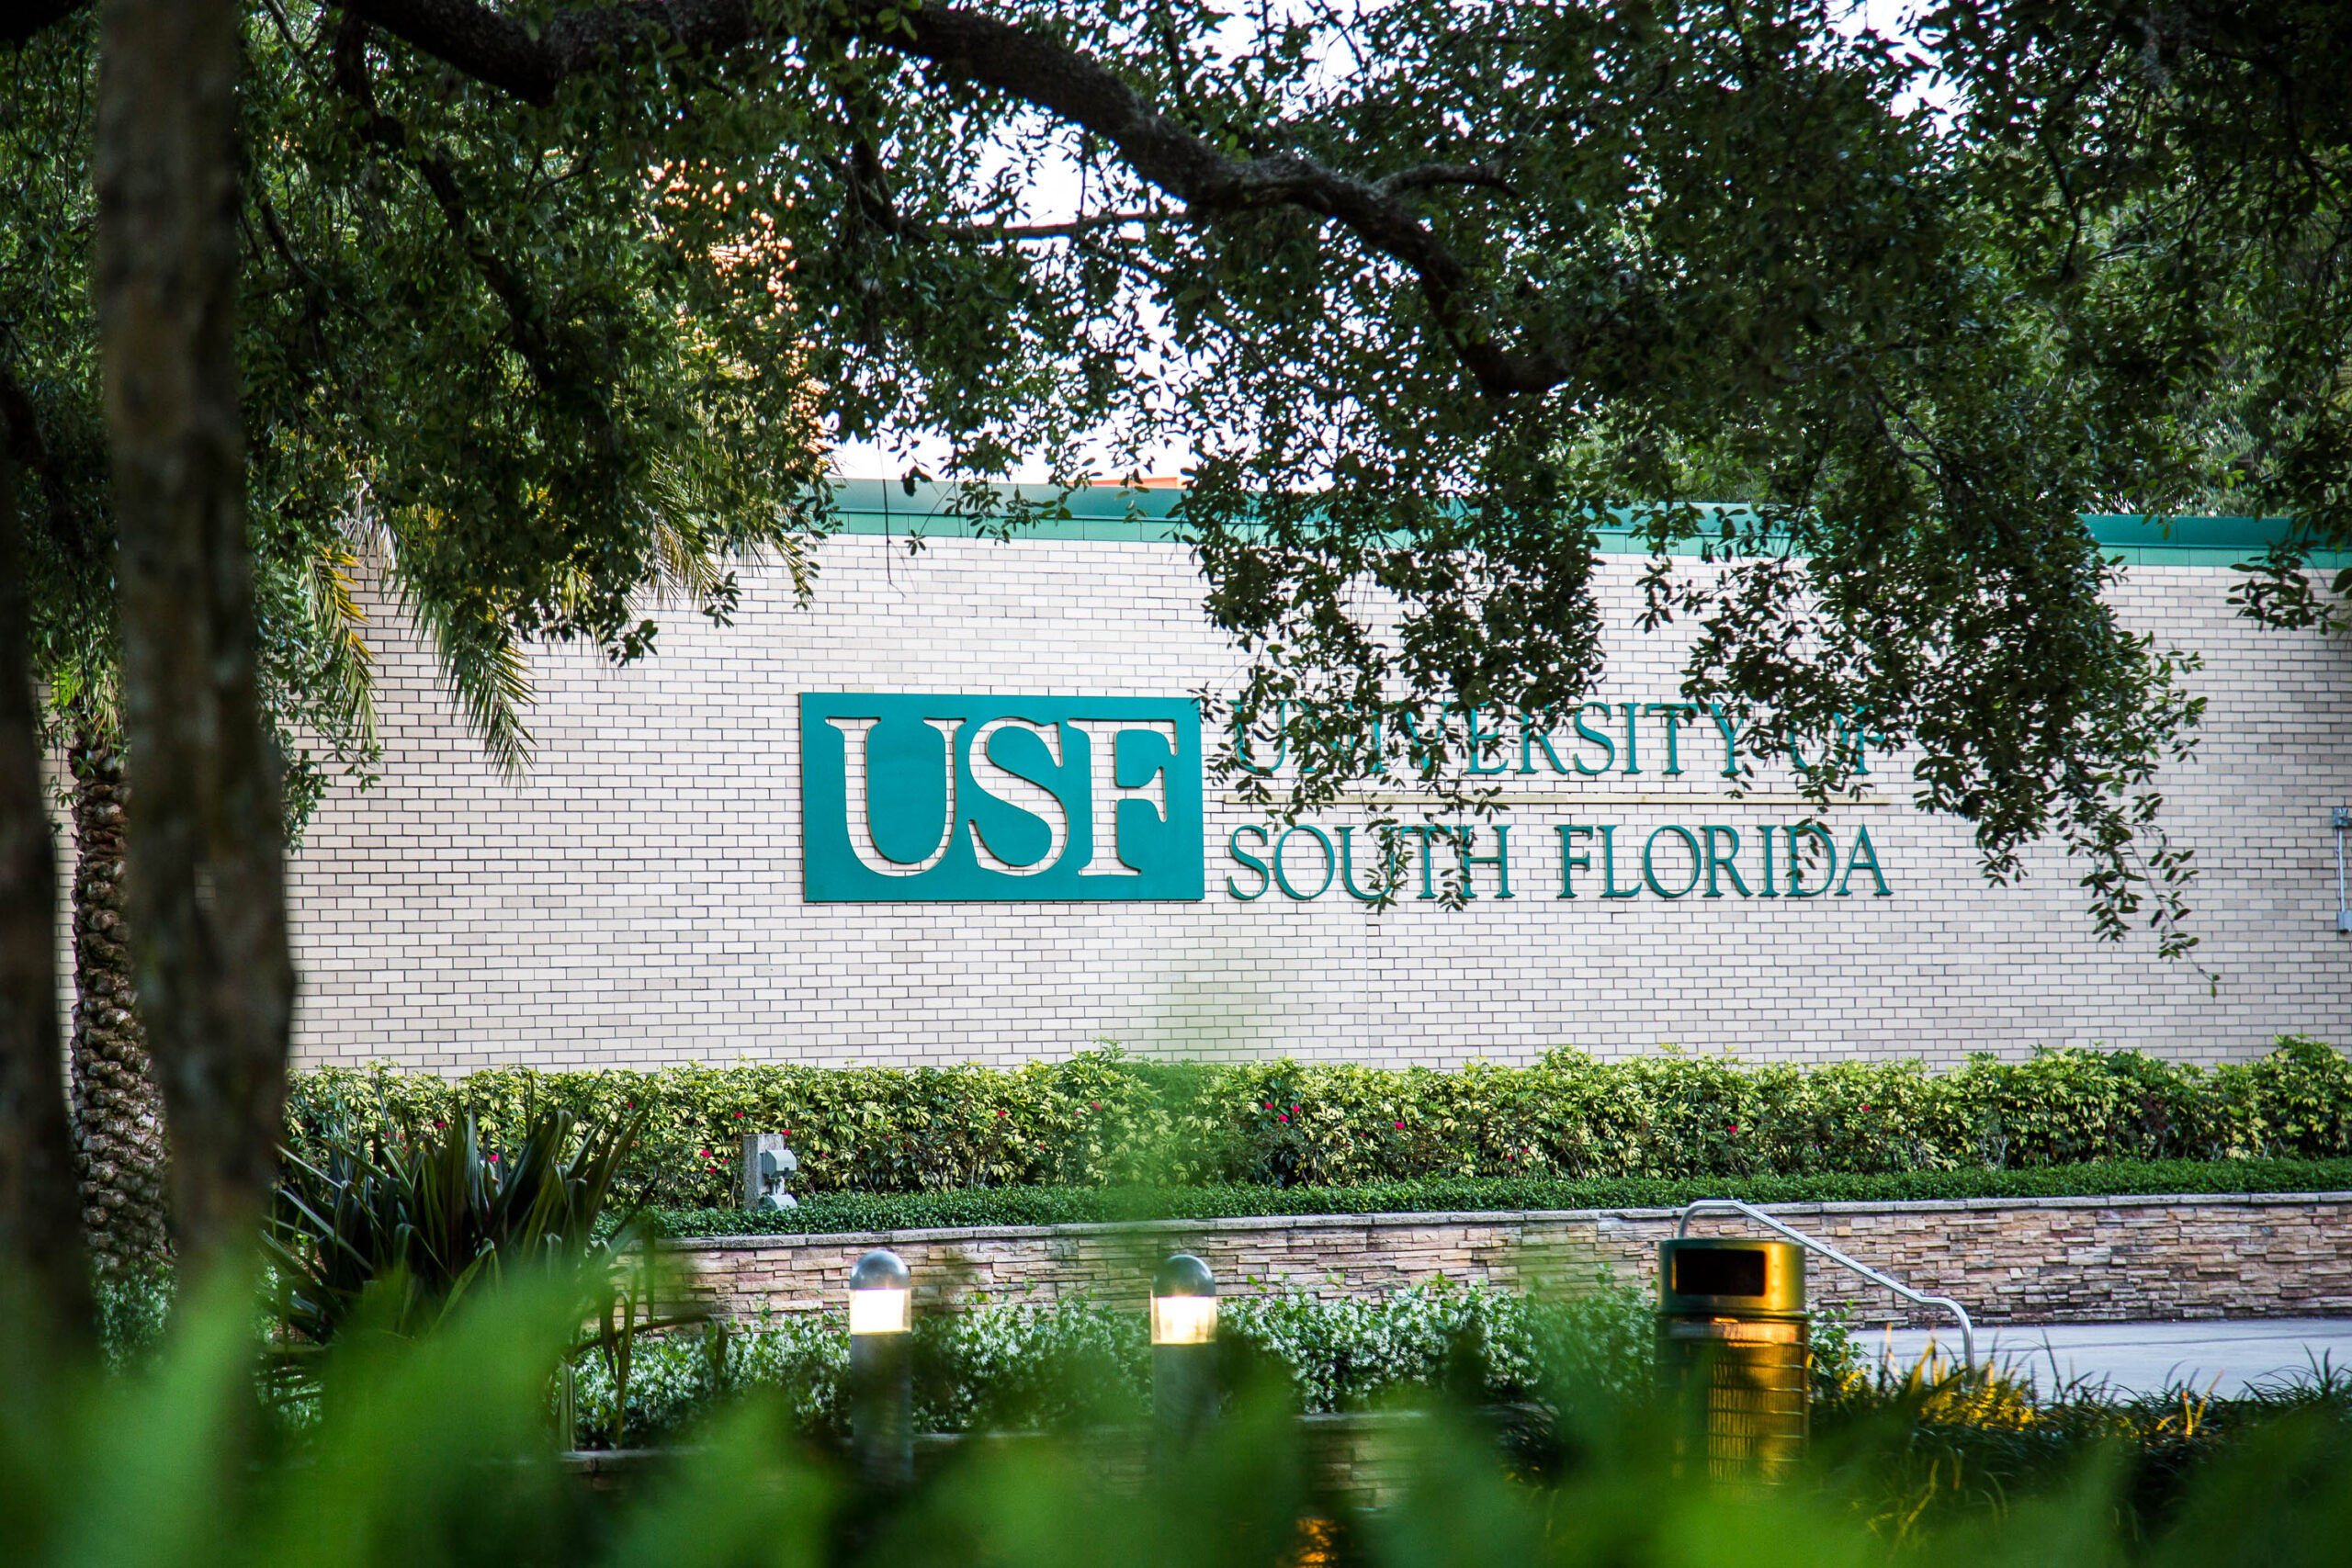 USF reaches highest rank to date by U.S. News & World Report